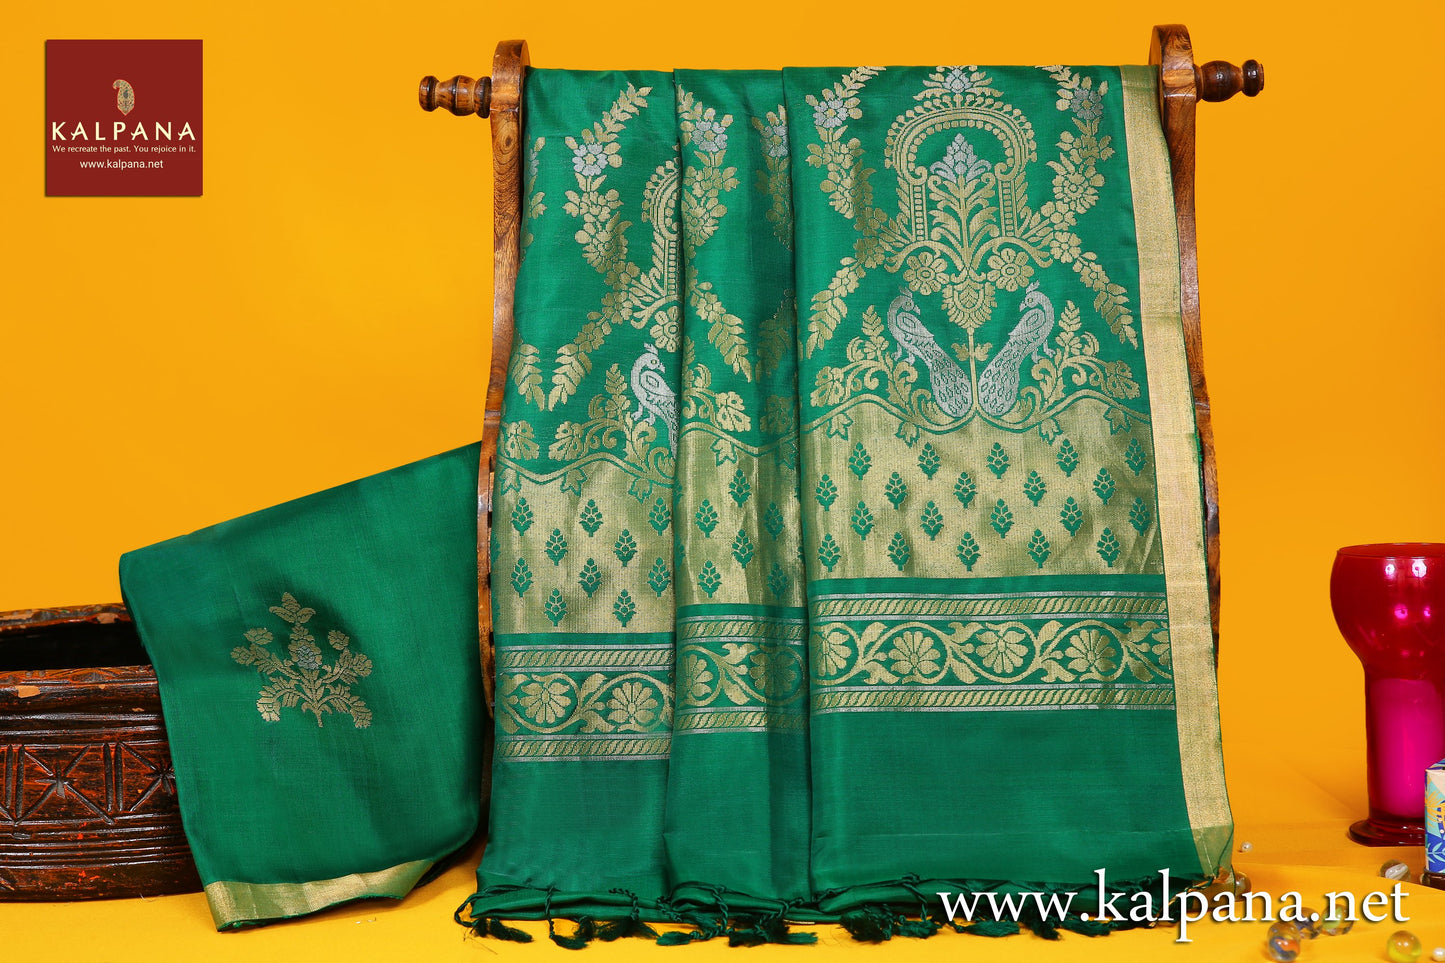 Coimbatore Handloom Pure Silk Saree with All Over Woven Motifs and Woven Zari Border. The Palla is  Woven Zari. It comes with Self Colored Plain Unstitched Blouse with Zari Border. Perfect for Multi Occasion Wear.  Recommended for All season(s). Dry Clean Only